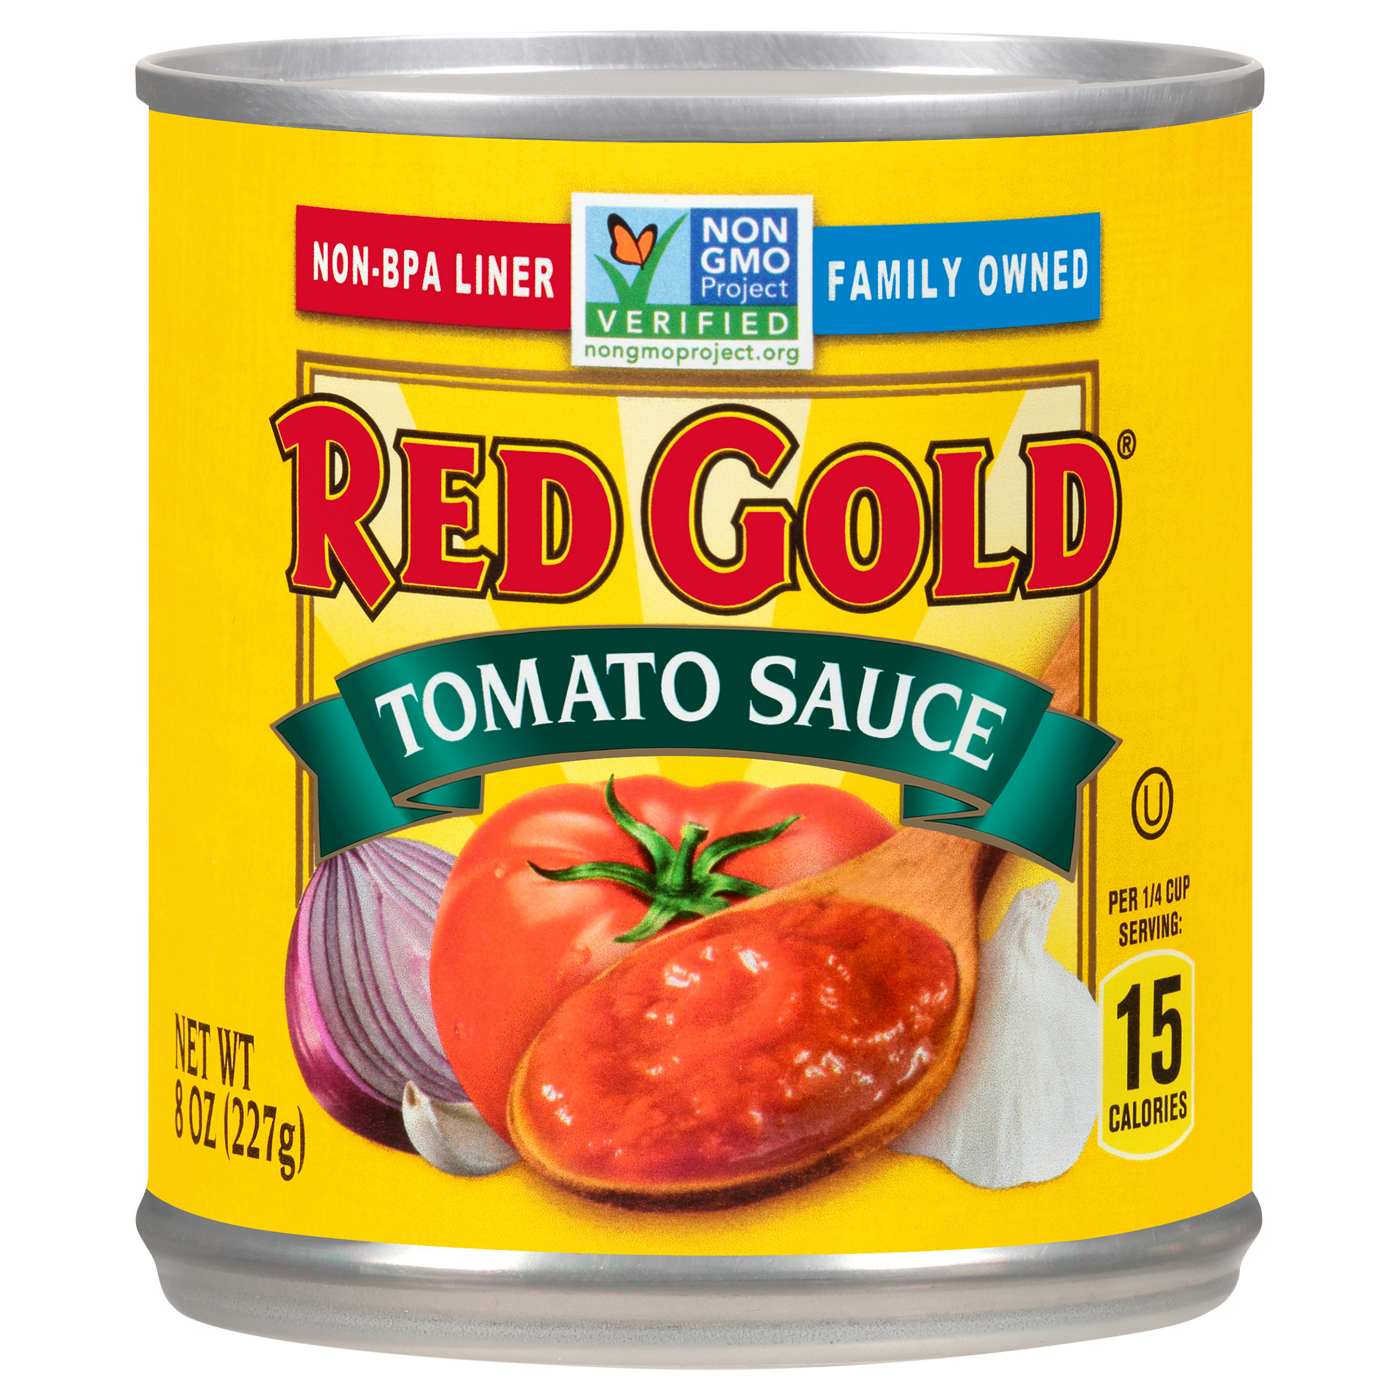 Red Gold Tomato Sauce; image 1 of 2